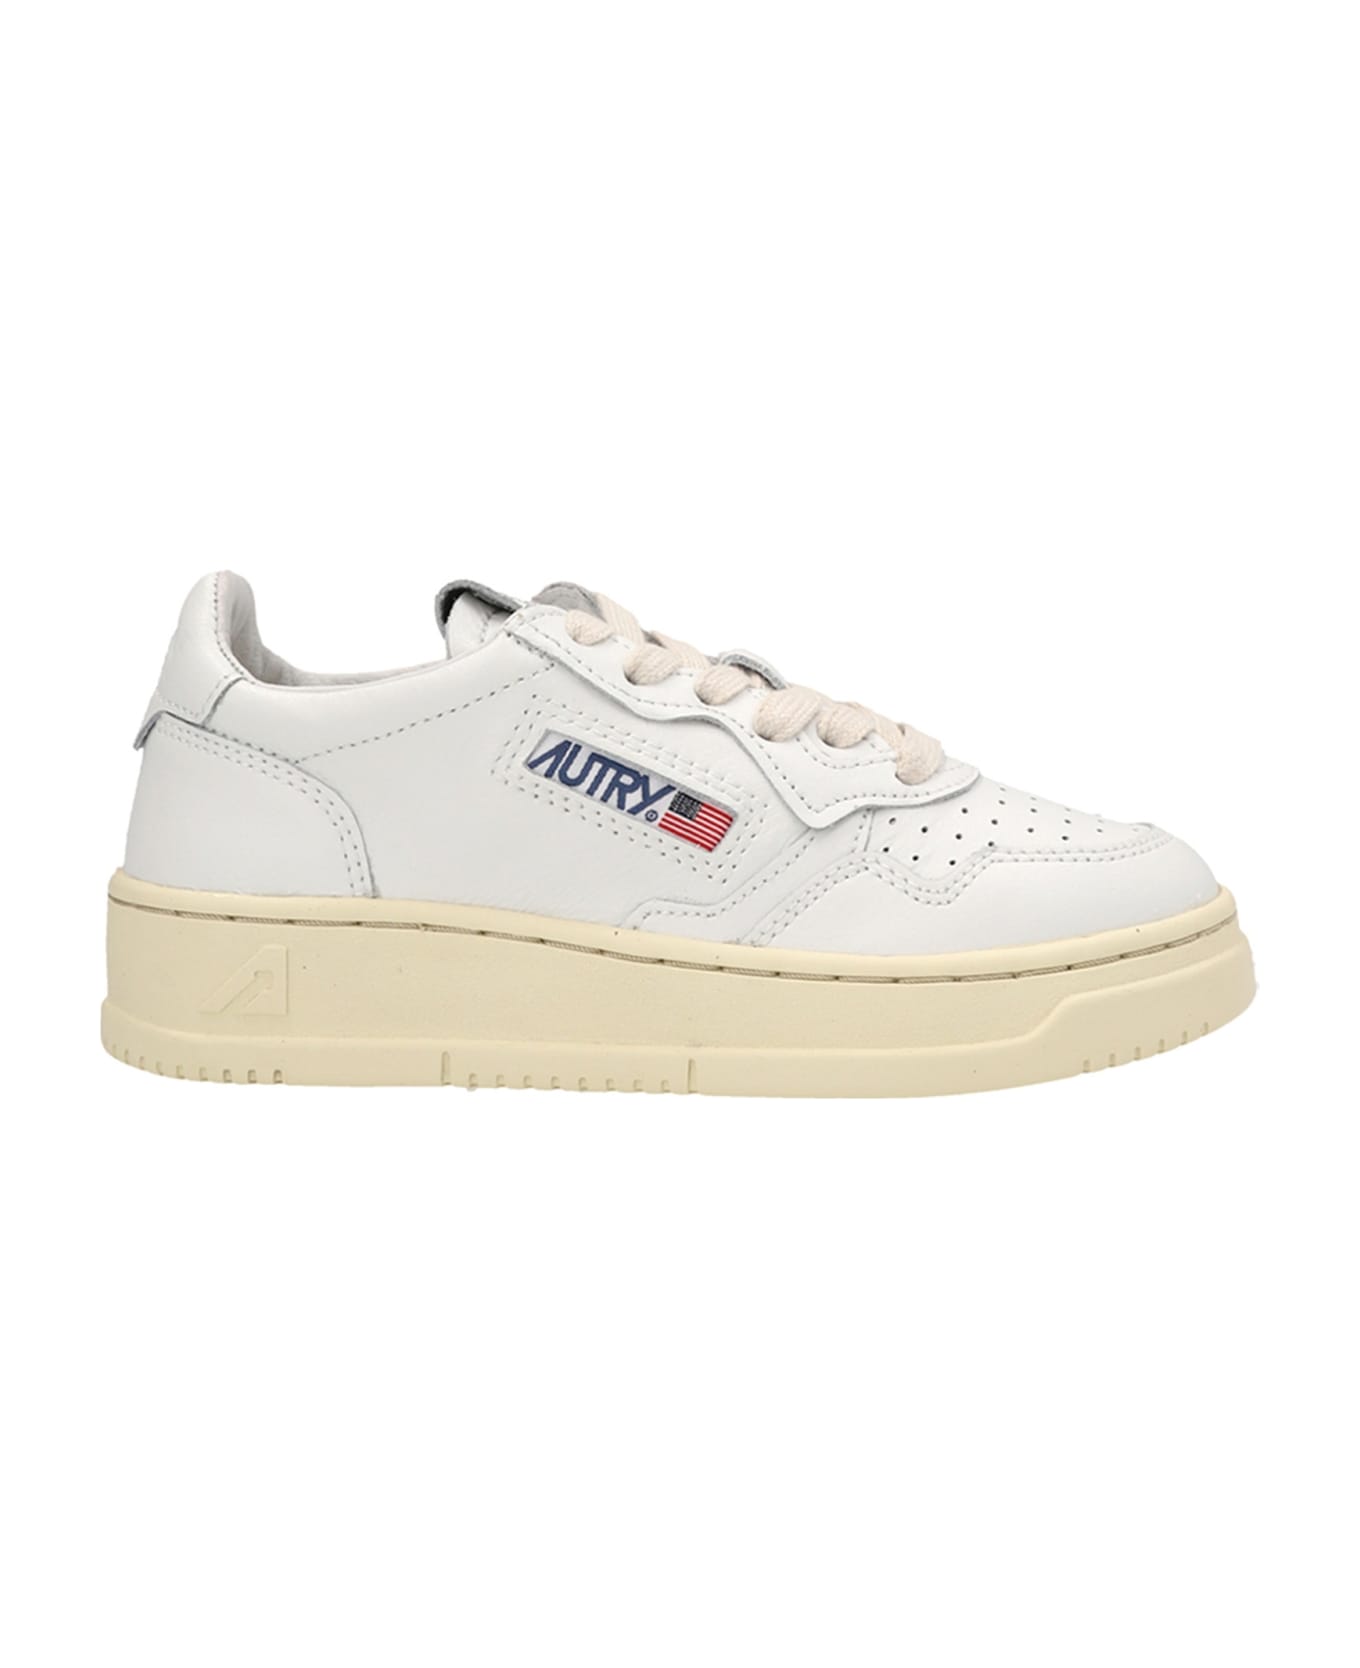 Autry 'autry' Sneakers - White